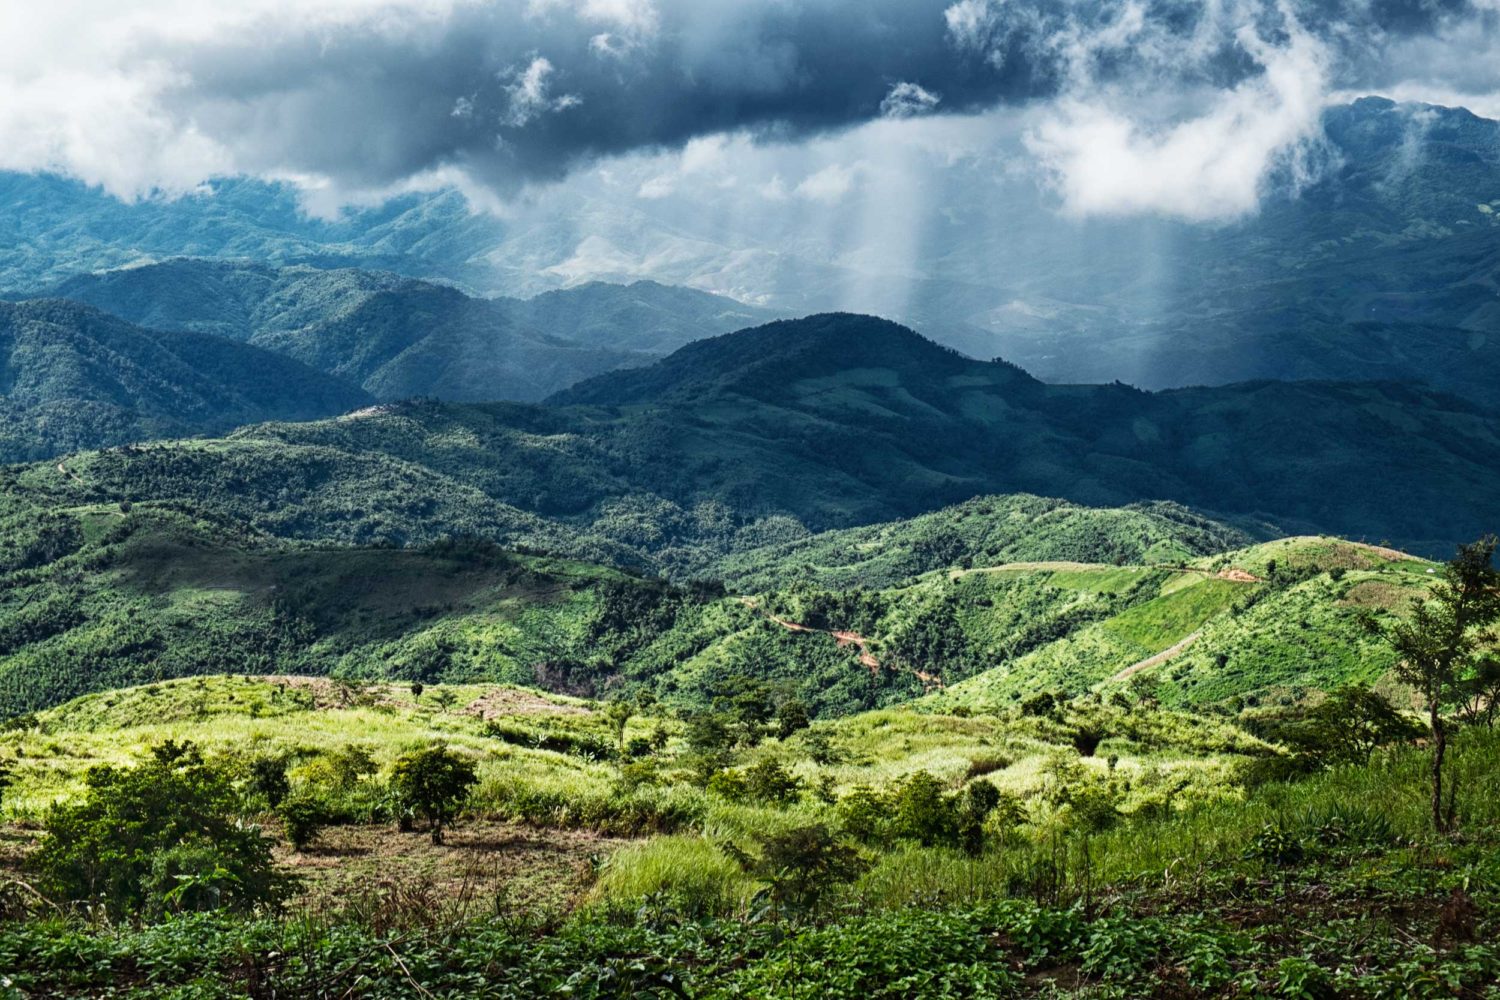 View out over mountain ranges with a cloudburst above them in the distance, Myanmar